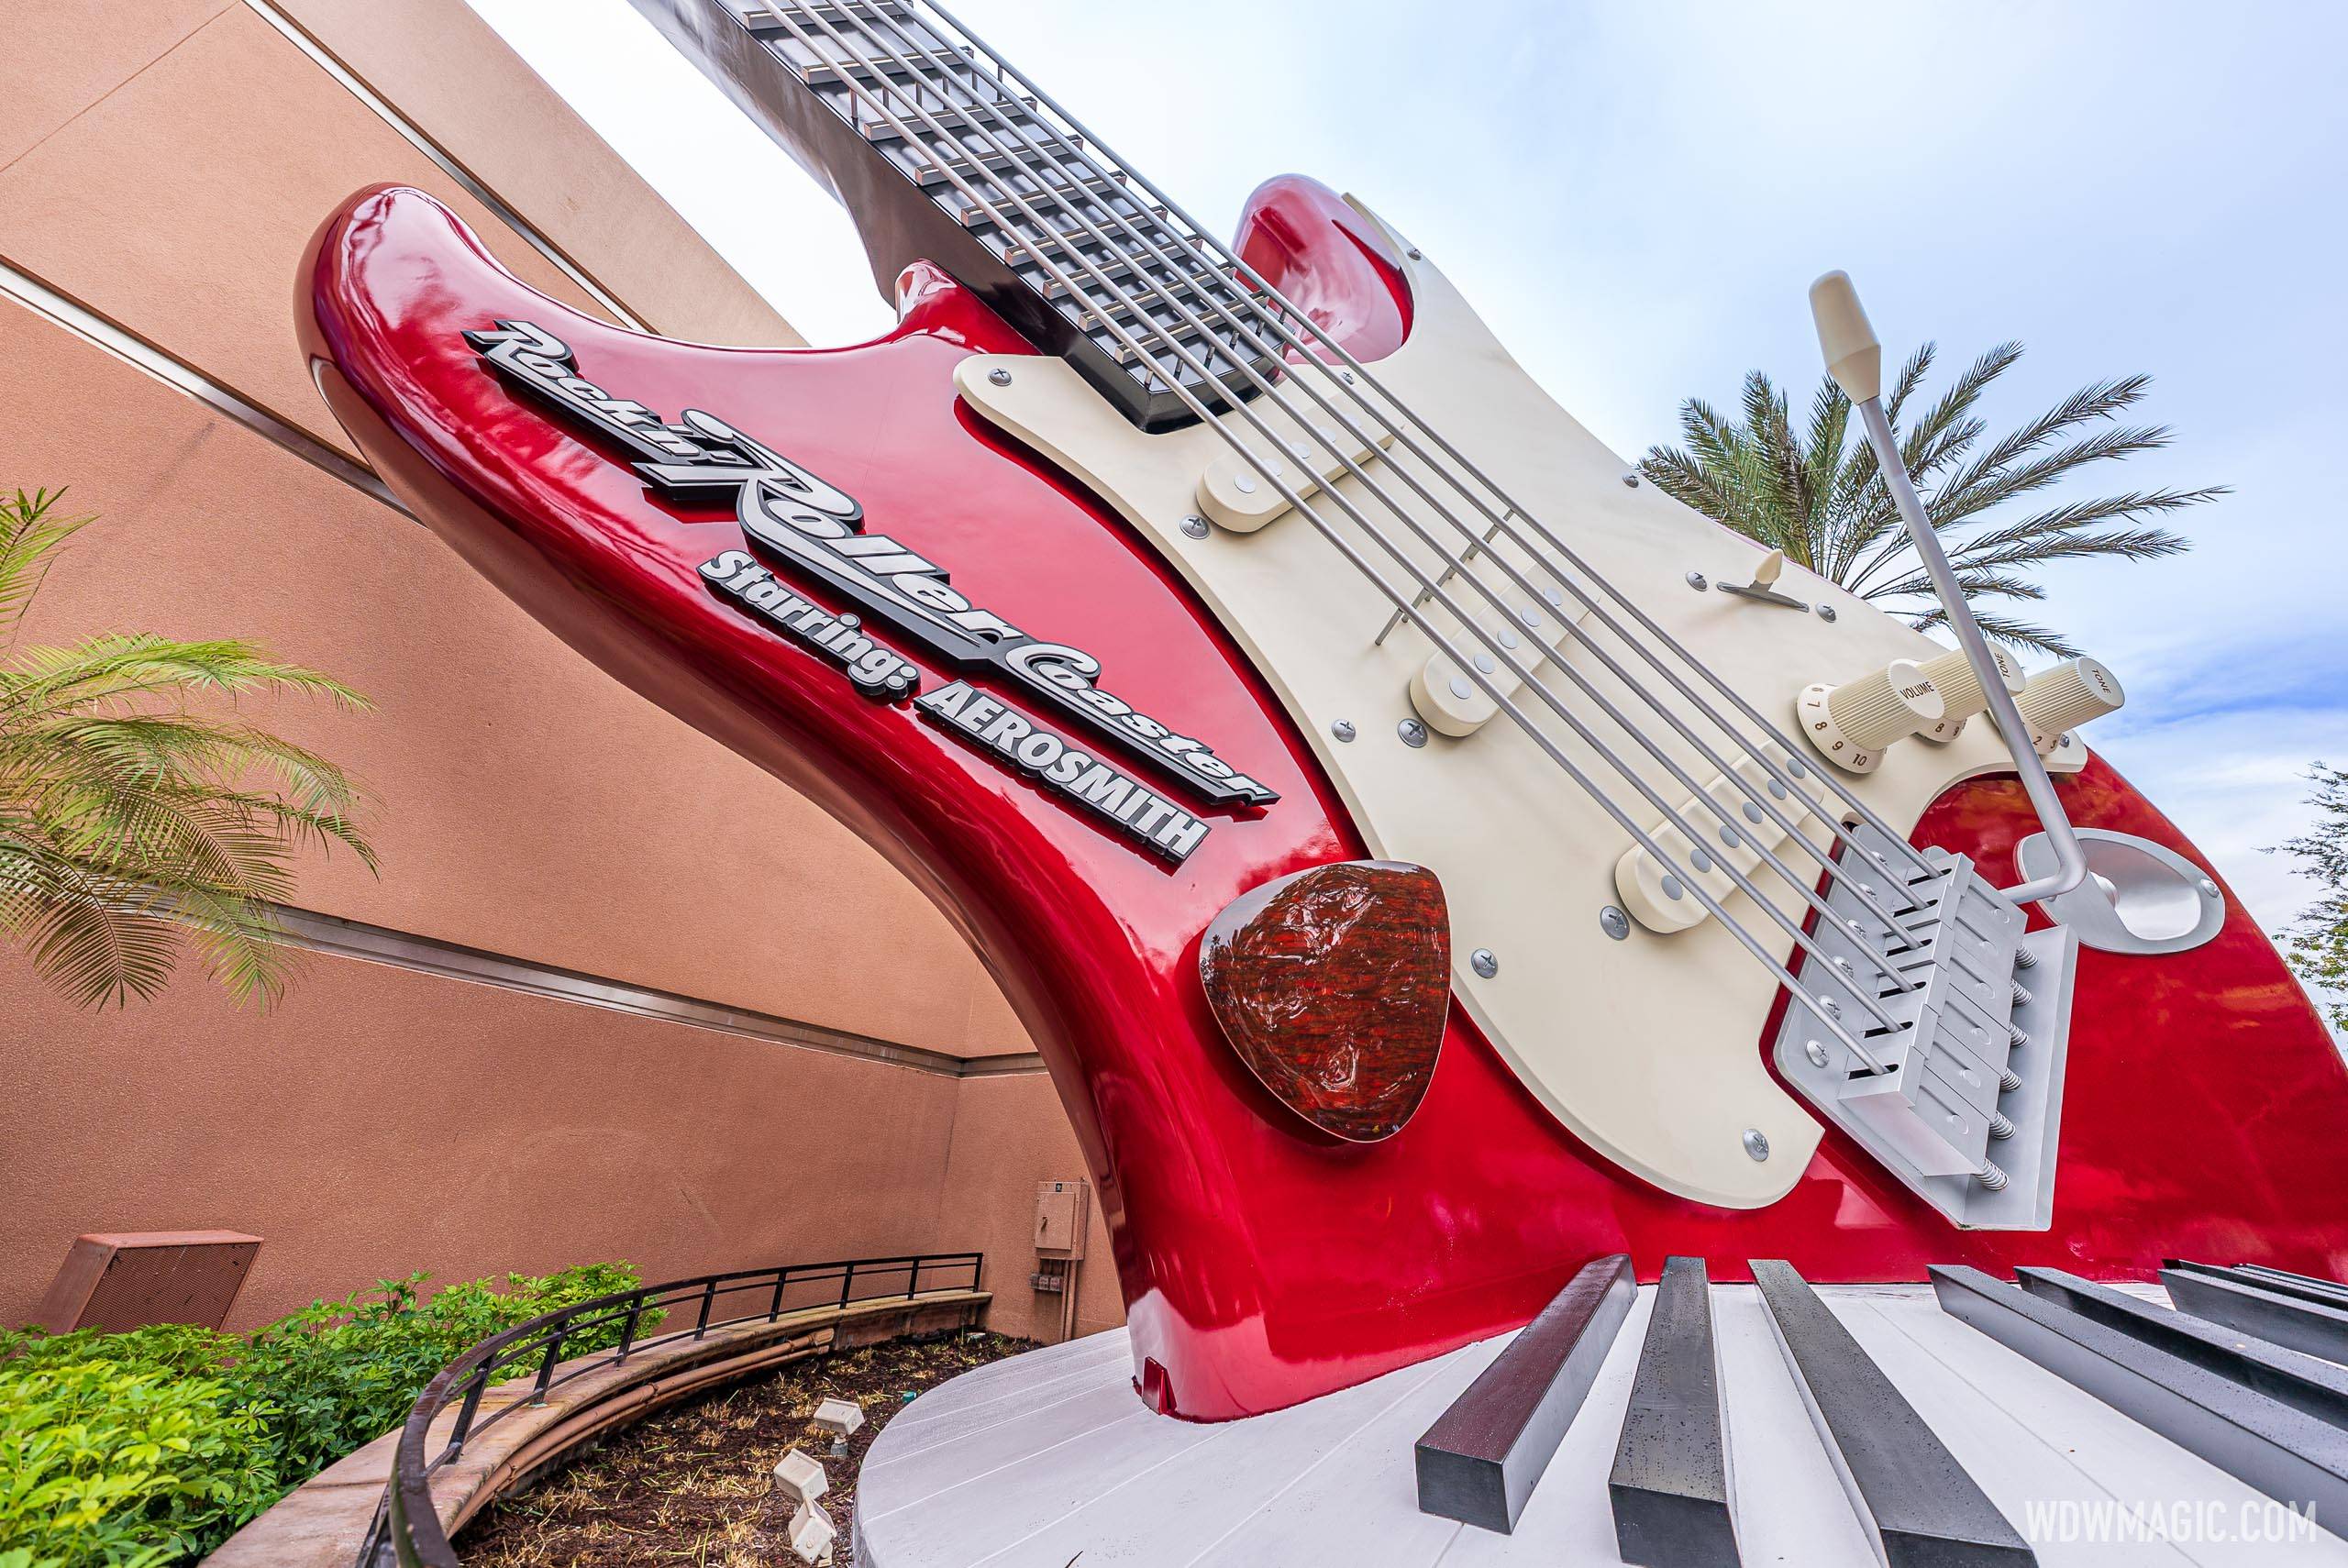 Walt Disney World's Rock 'n' Roller Coaster closure may be longer than first thought